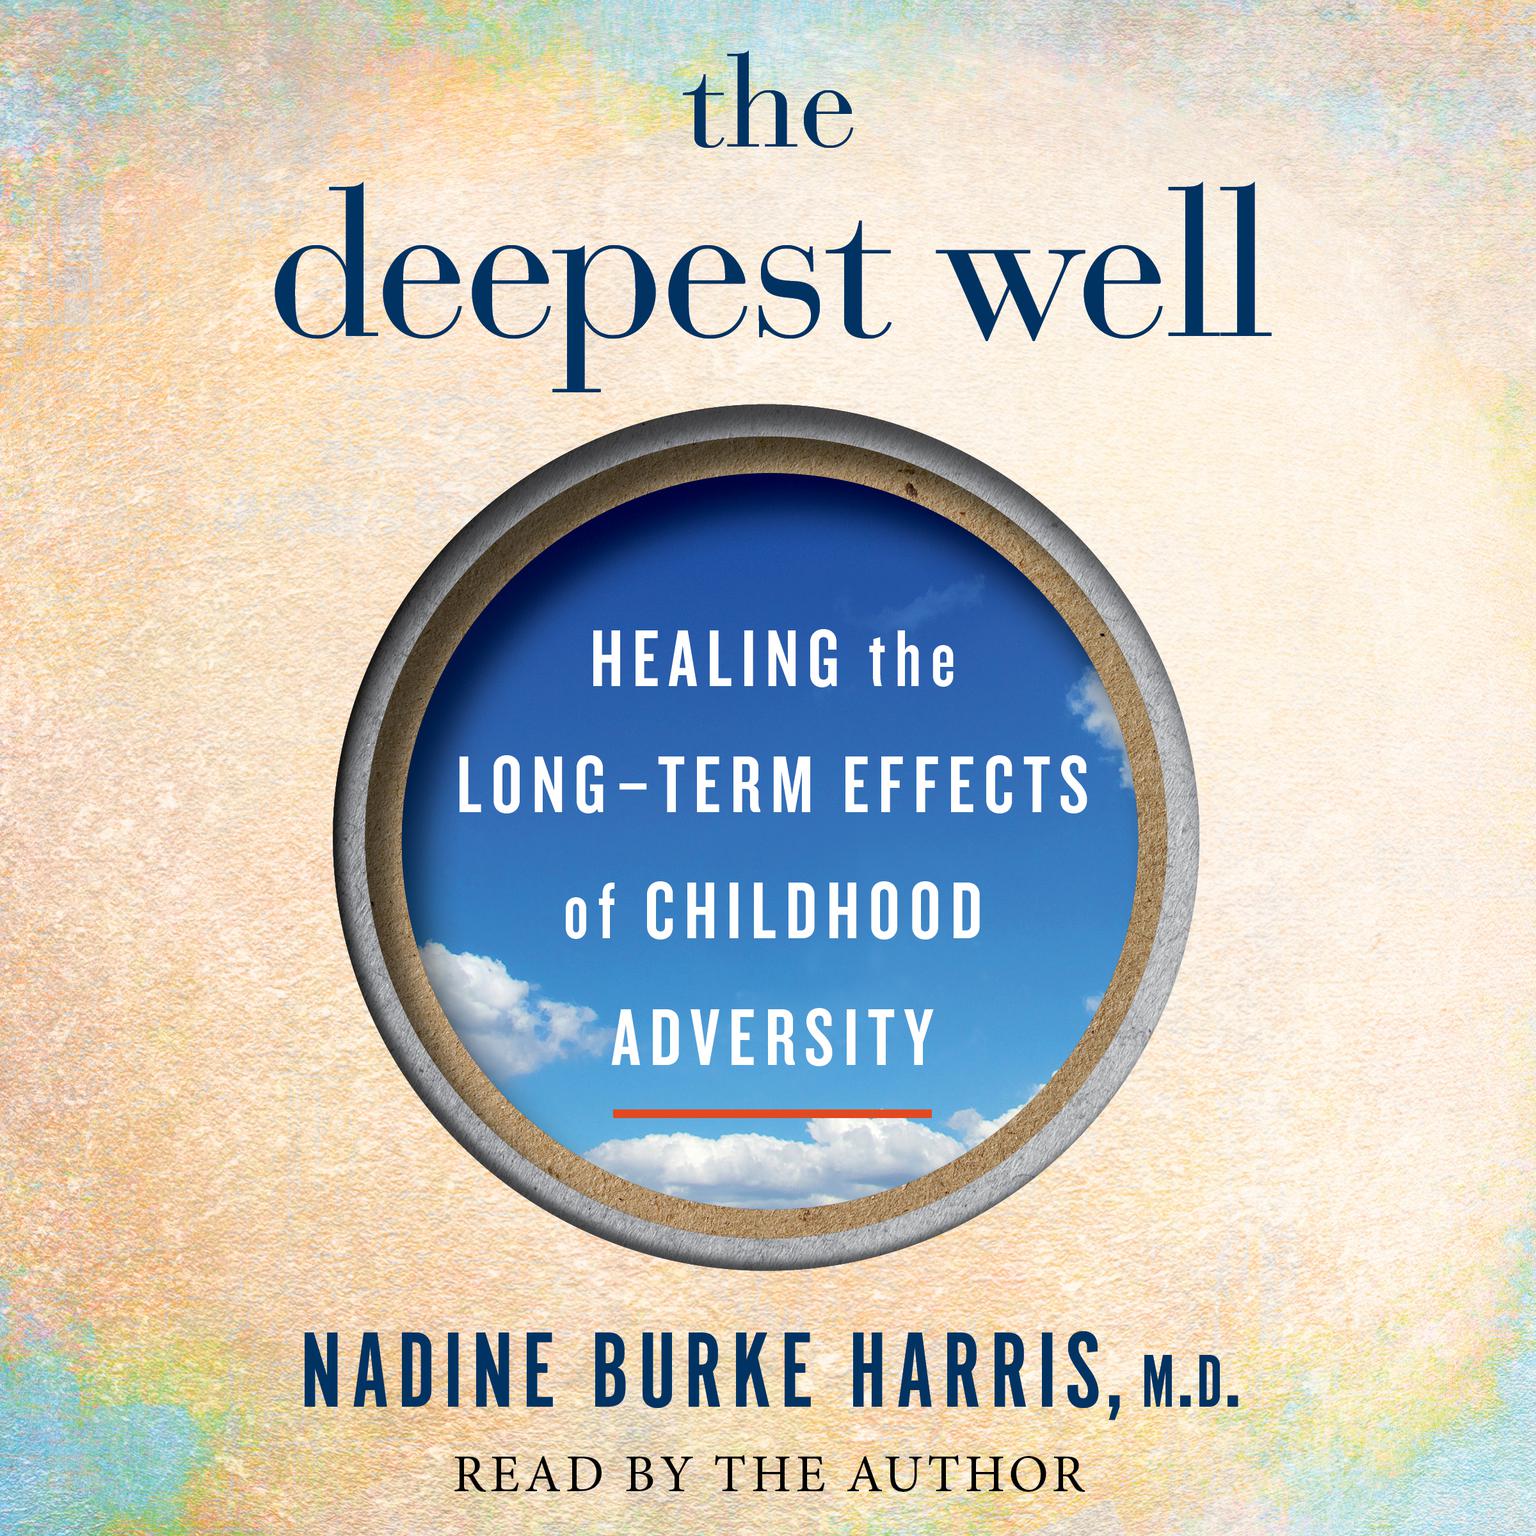 The Deepest Well: Healing the Long-Term Effects of Childhood Adversity Audiobook, by Nadine Burke Harris